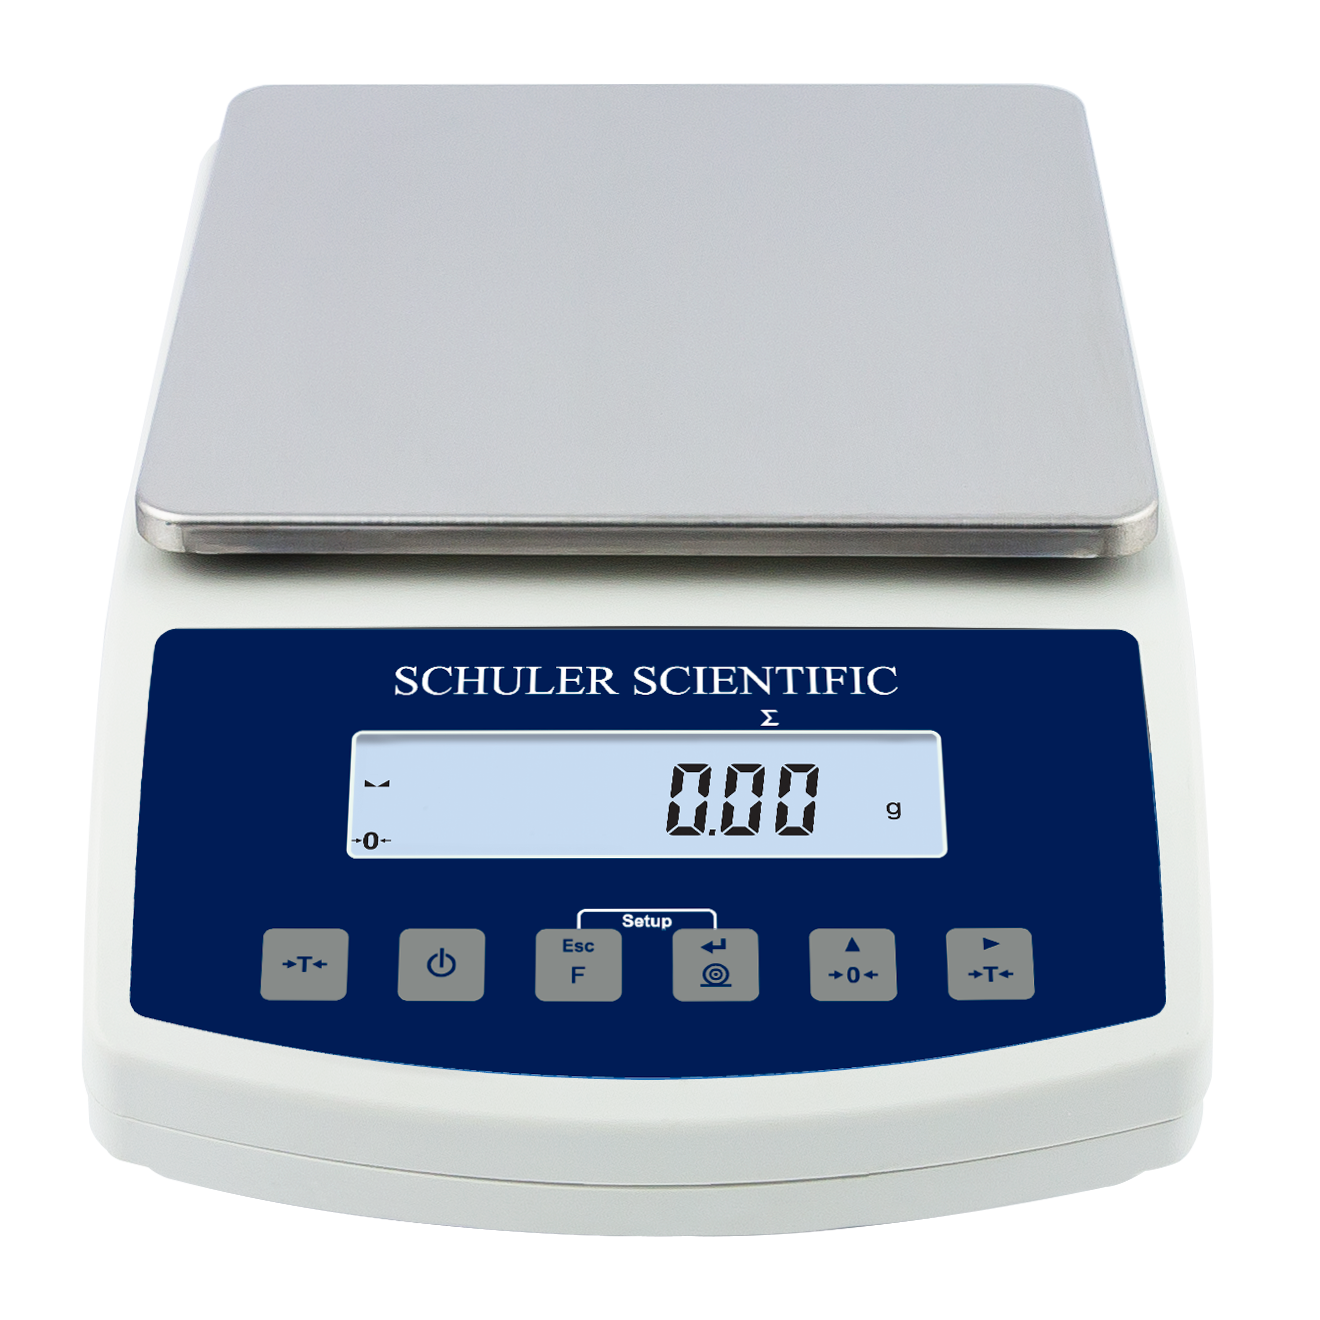 http://schulersci.com/userfiles/1181/files/S-Series/SH%20Series%2001.png